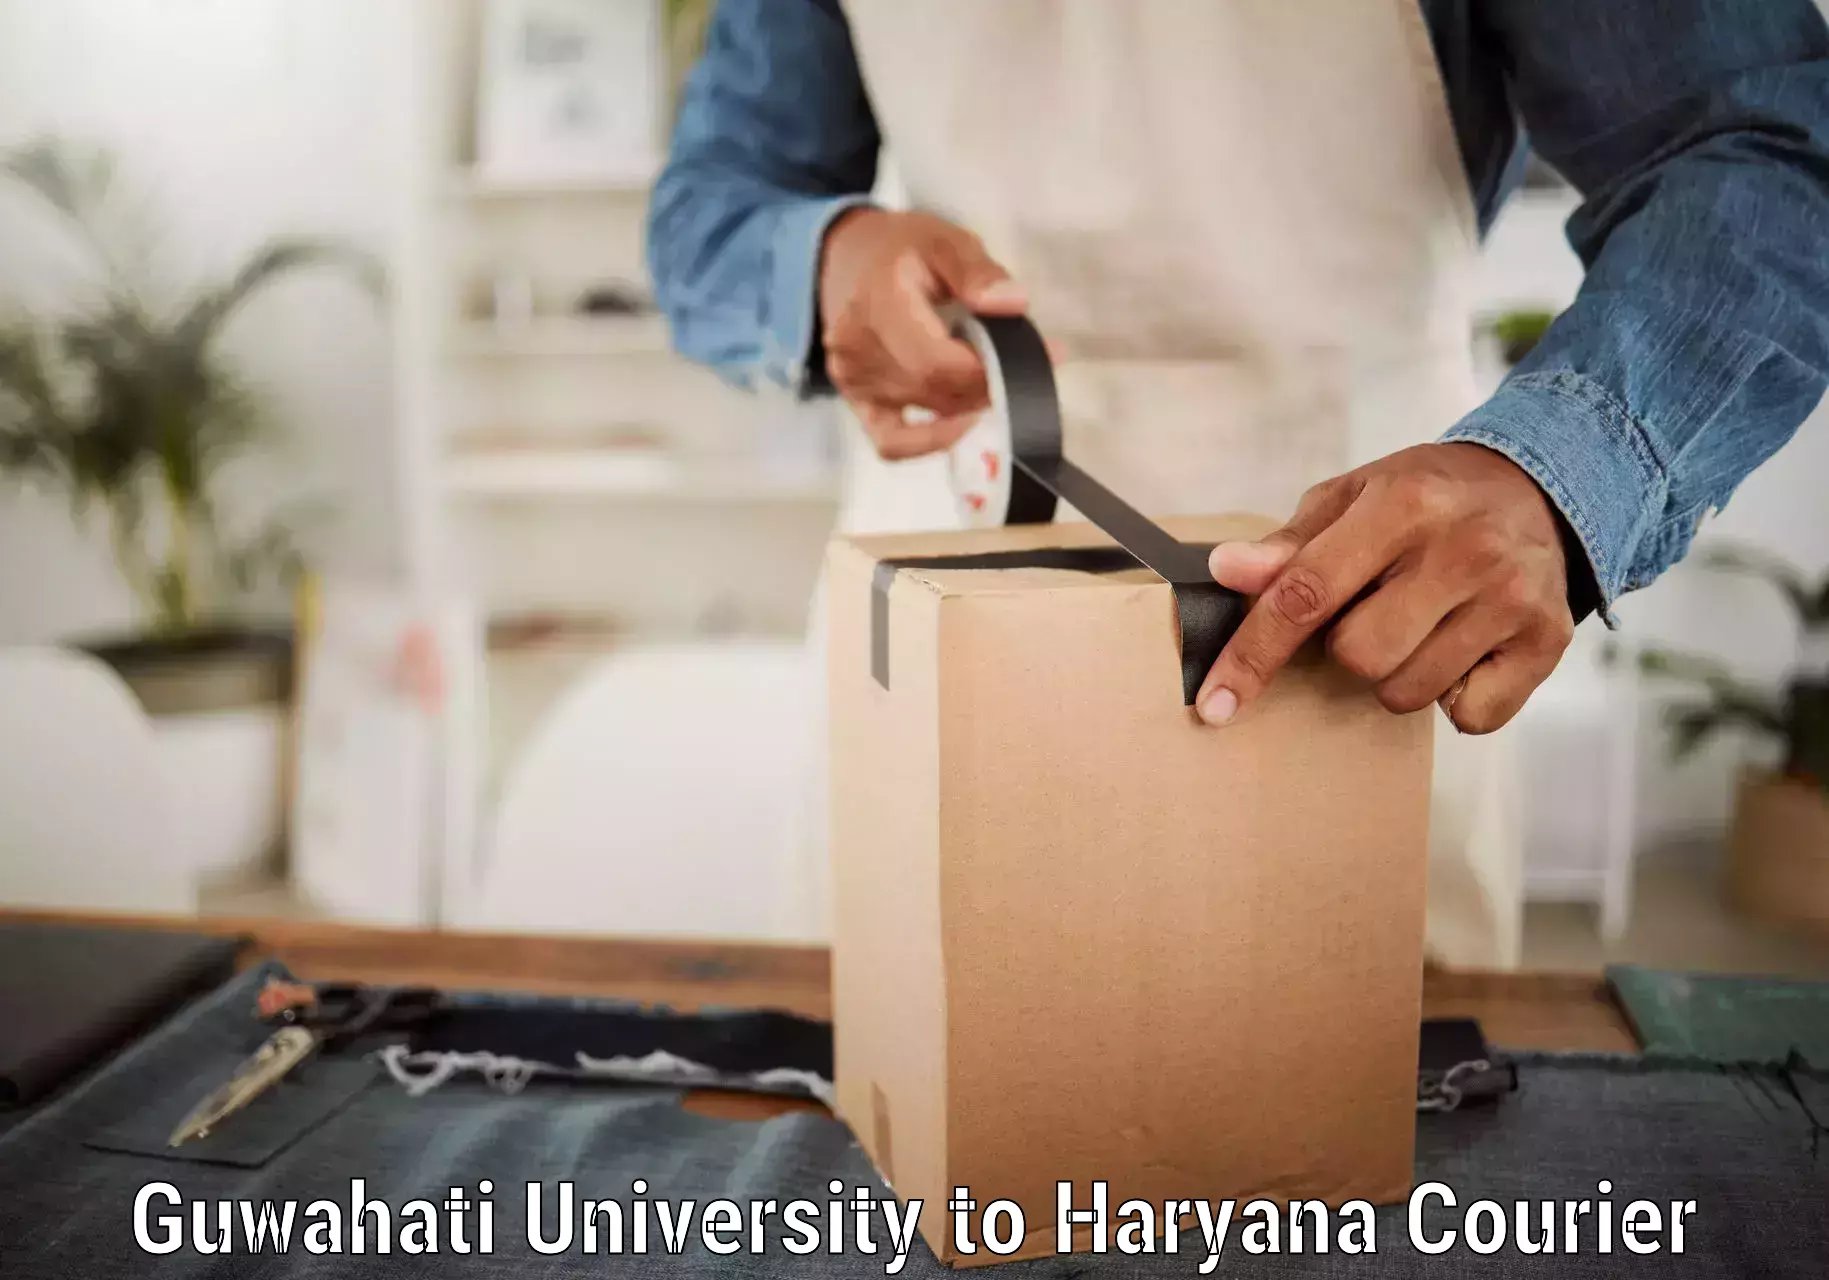 24-hour courier service Guwahati University to Chaudhary Charan Singh Haryana Agricultural University Hisar